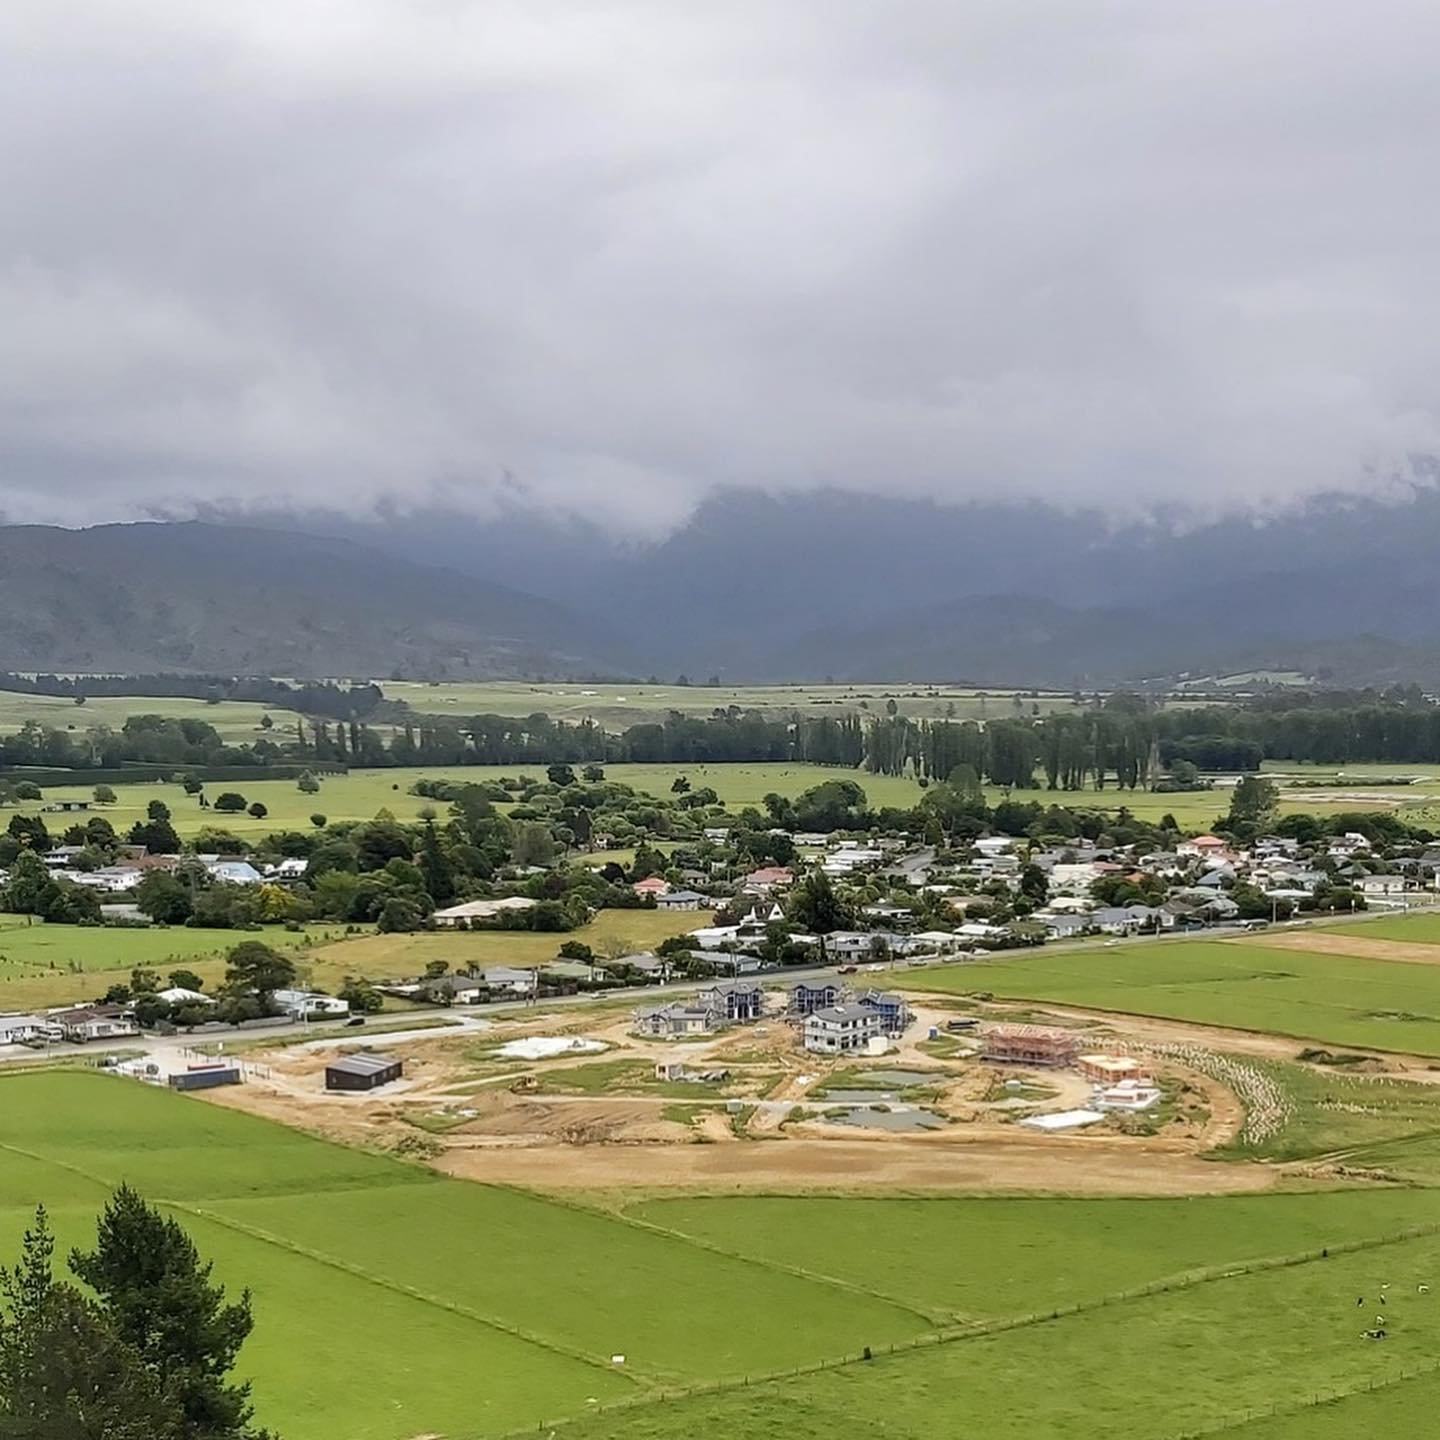 Progress update for Stage 1 of the Takaka Cohousing Neighbourhood - the first dwellings are nearing completion. Sustainable, locally sourced cypress logs for the pergolas and untreated macrocarpa weatherboards. All paints used are natural products wi